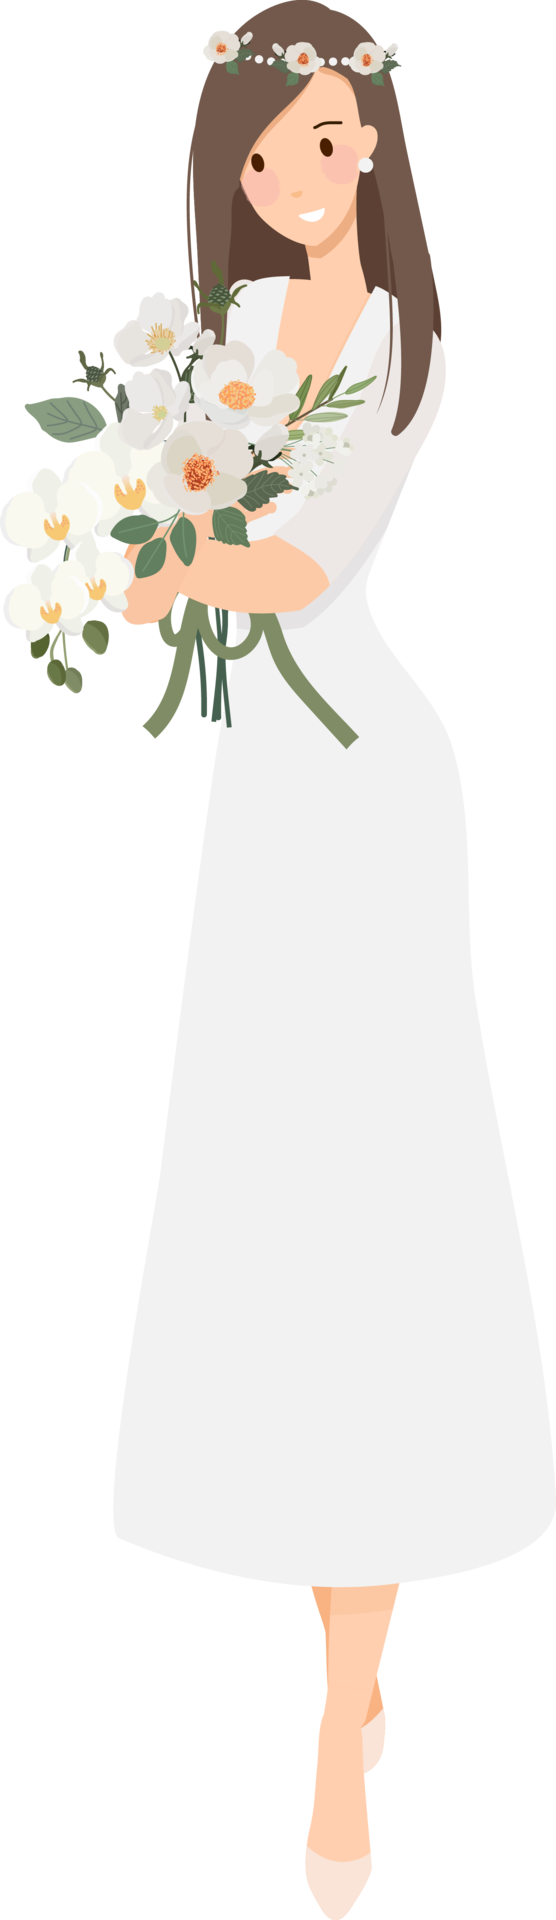 Free beautiful young bride in white wedding dress with Phalaenopsis orchid  flower bouquet flat style cartoon 11654343 PNG with Transparent Background